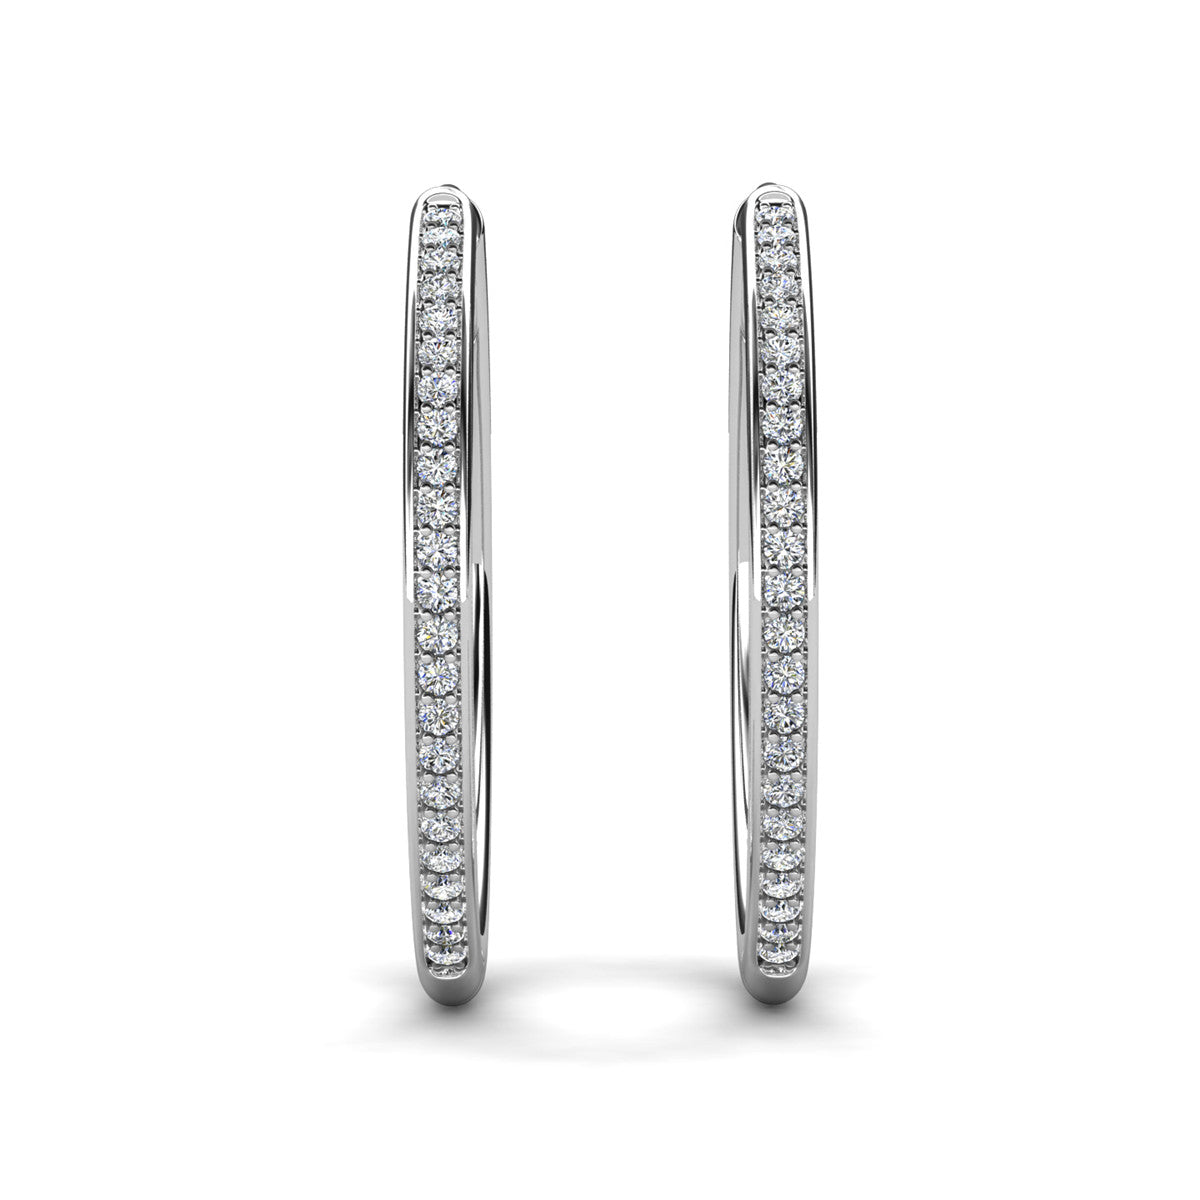 Moissanite by Cate & Chloe Delaney Sterling Silver Hoop Earrings with Moissanite and 5A Cubic Zirconia Crystals